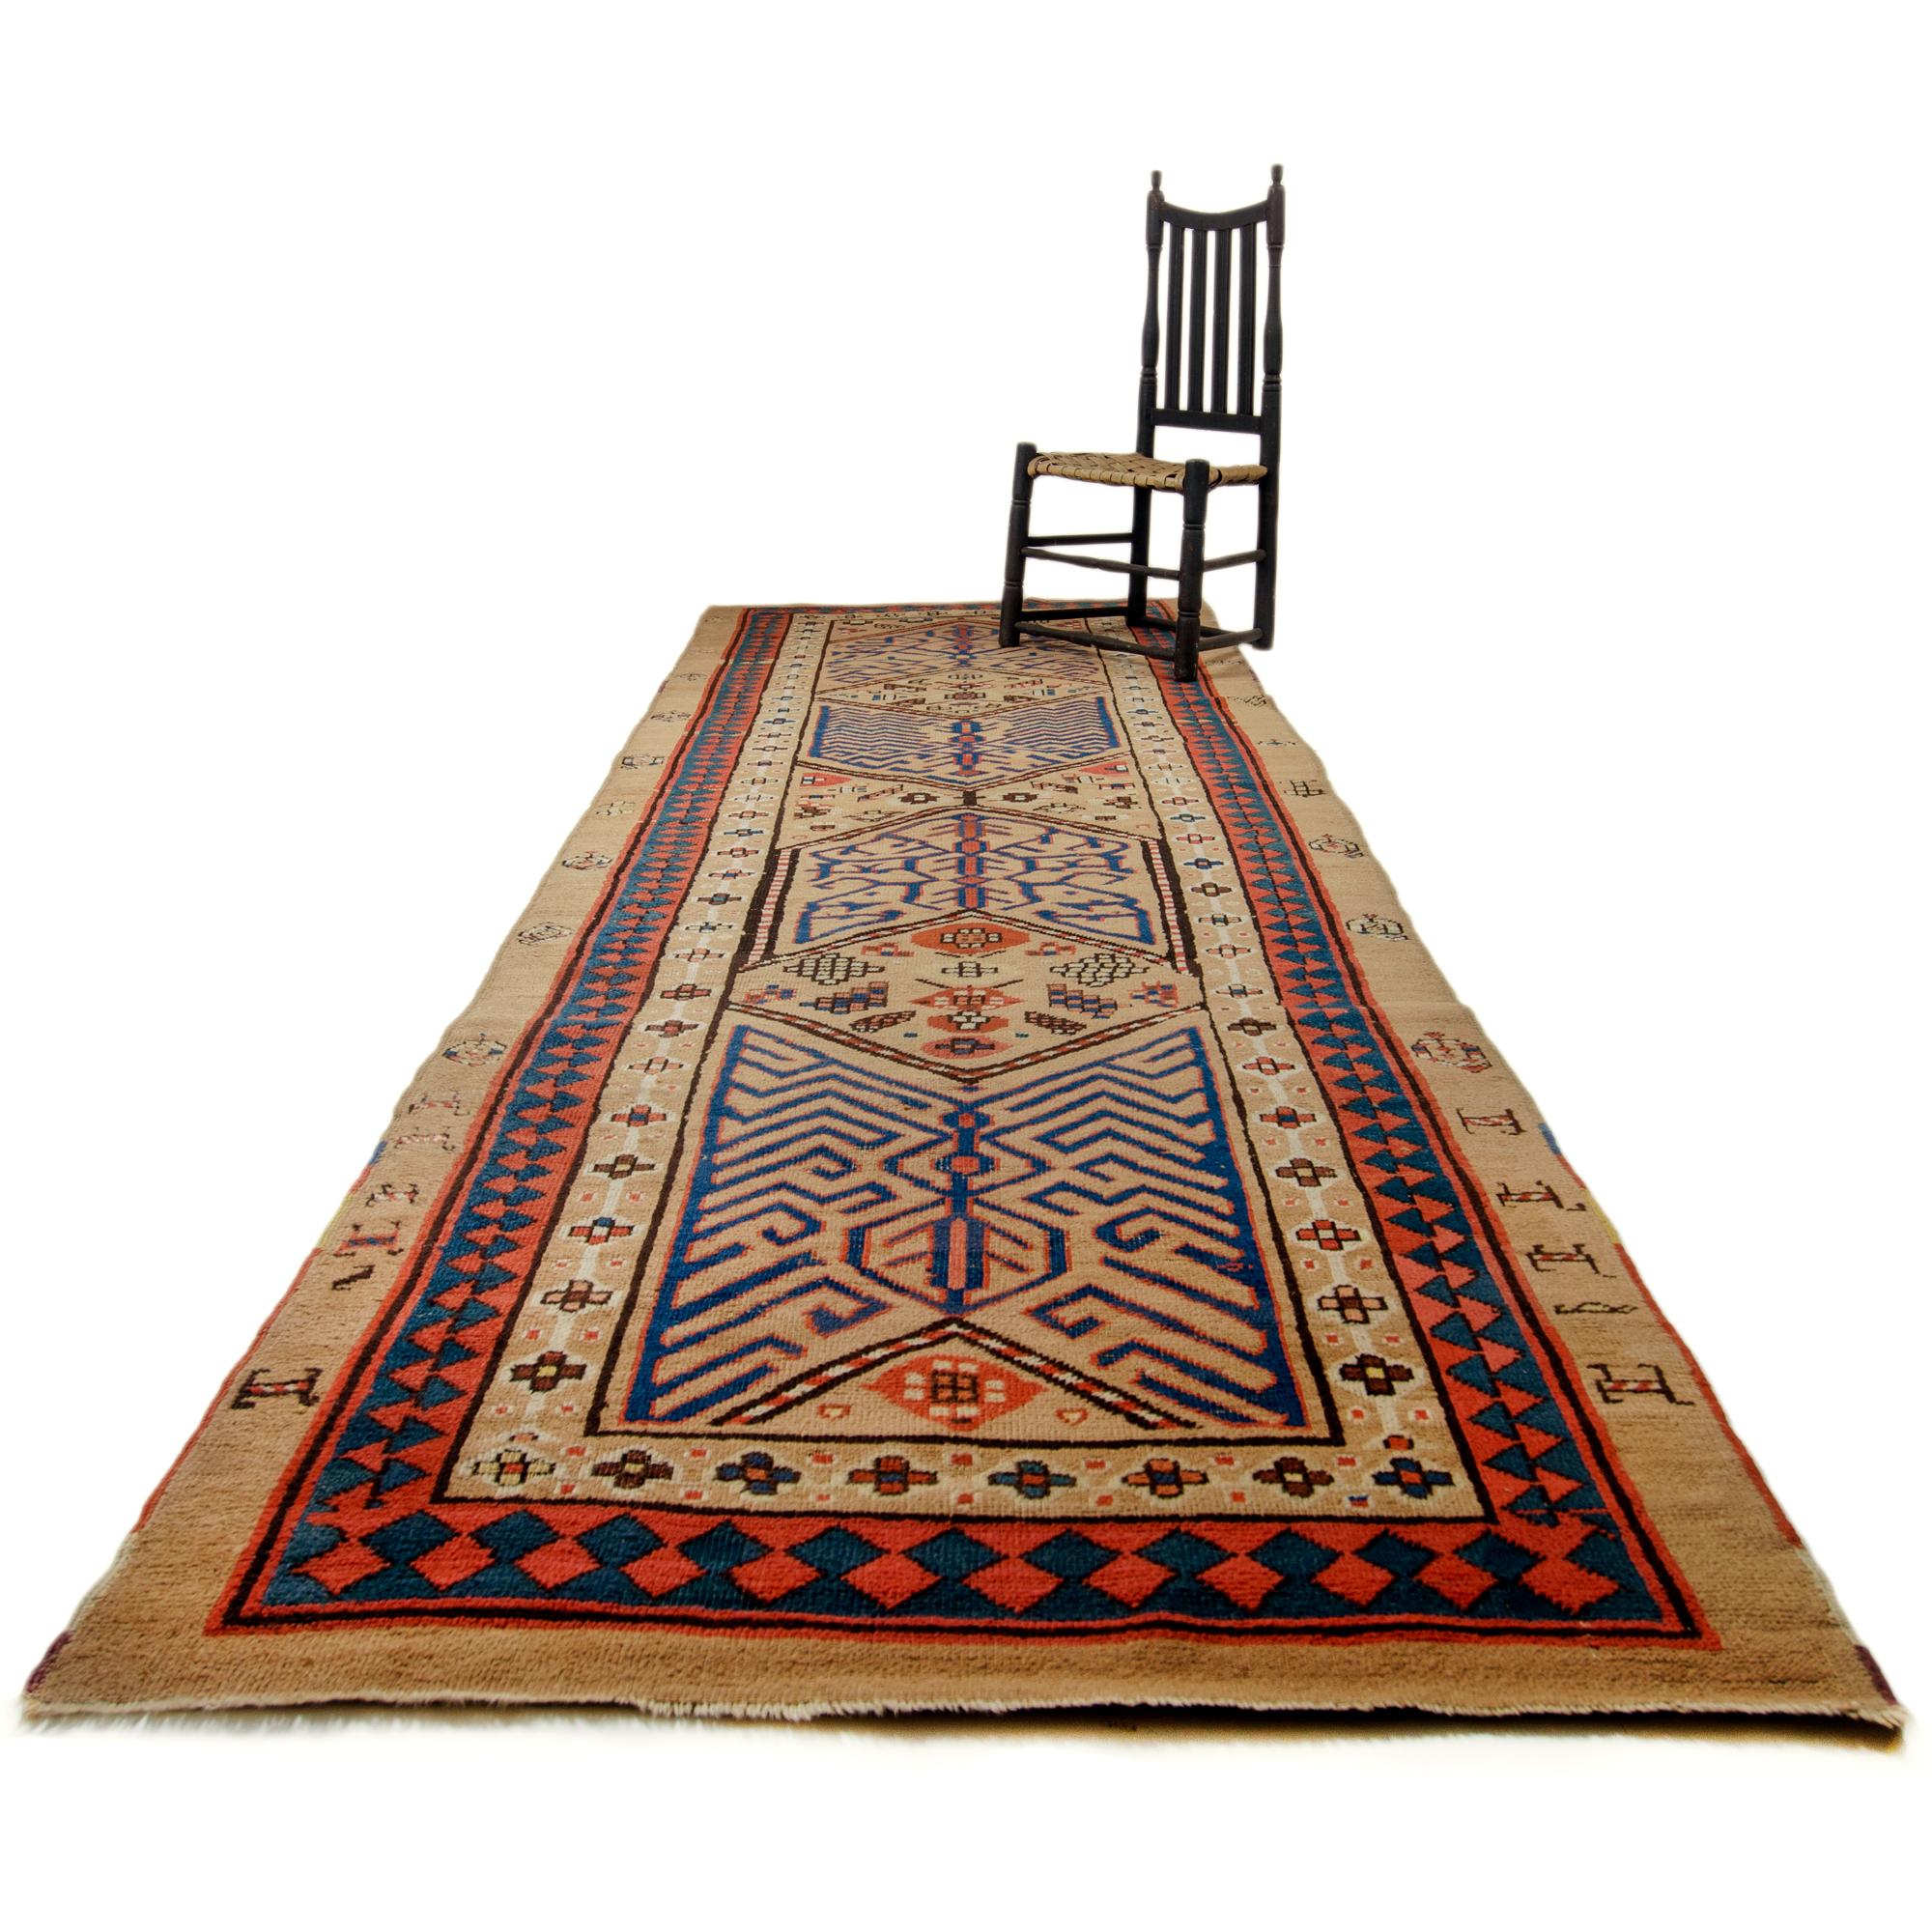 An antique Serab rug runner, Persia, late 19th century.

Red and blue on natural, undied camel hair.  

Unique geometric design with animals in the margin. 

3’6” by 10’9”

42 by 129

